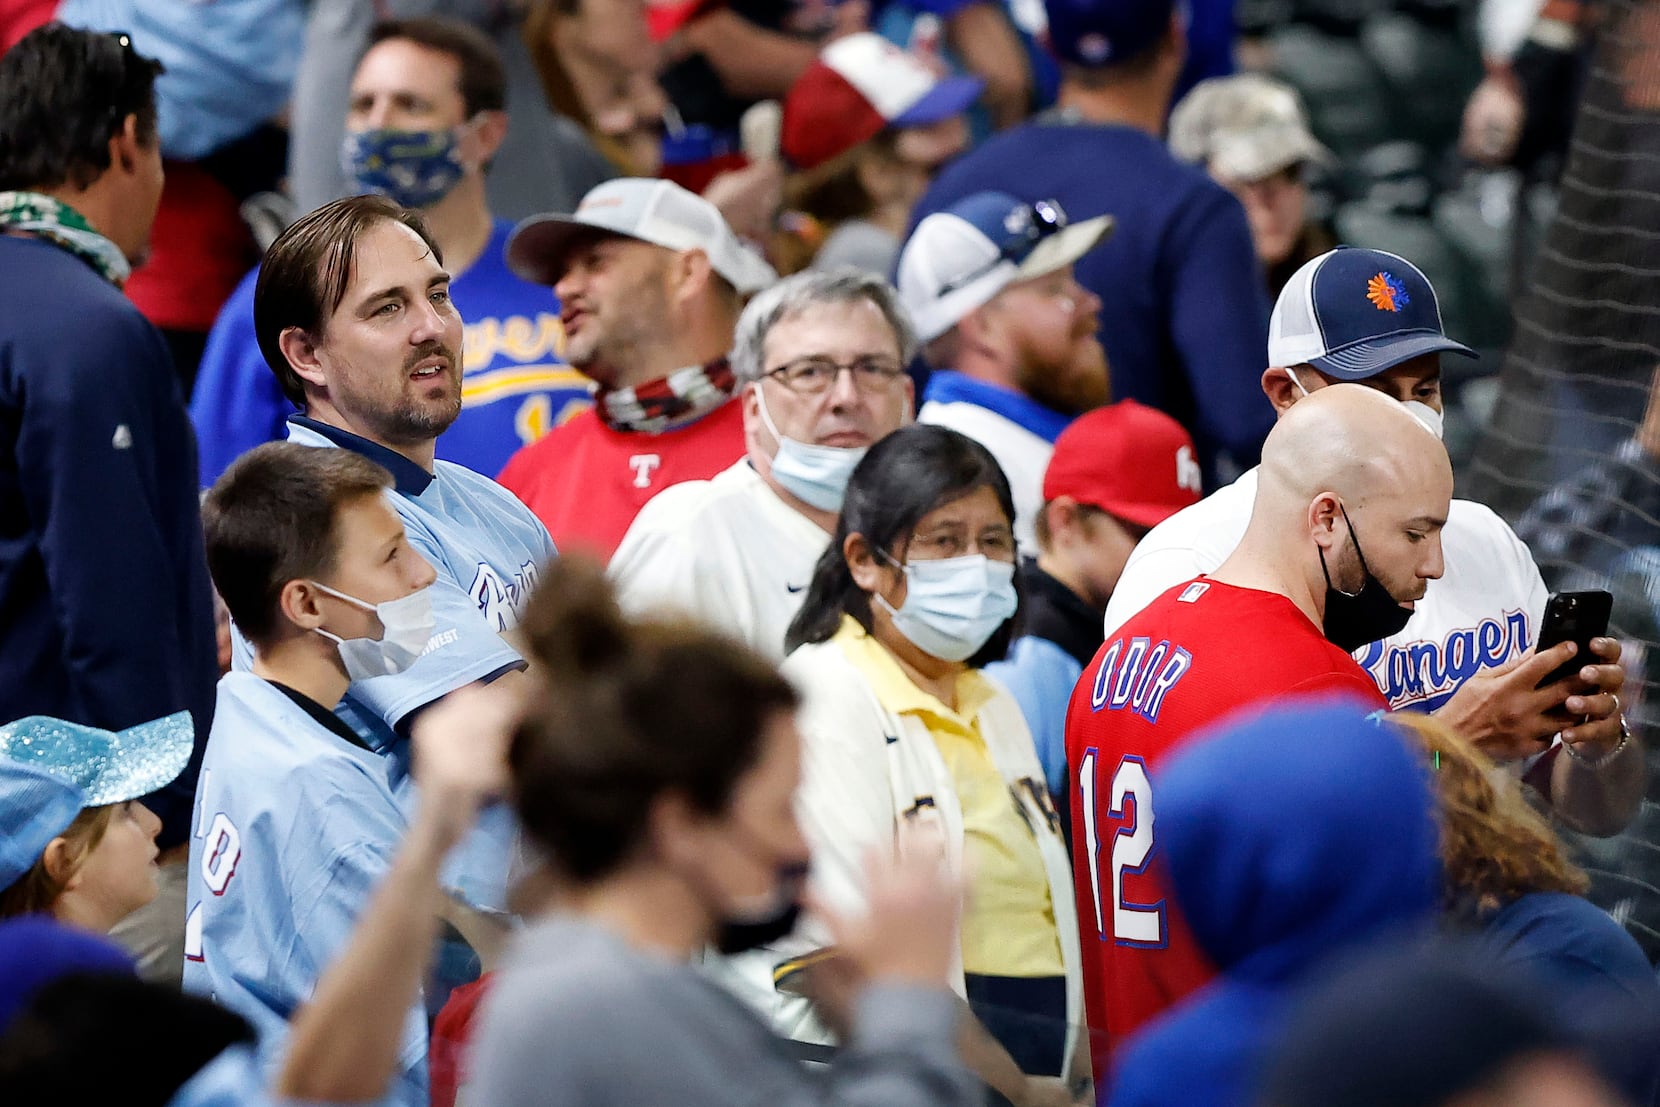 Opening Day fans to notice COVID restrictions at Coors Field